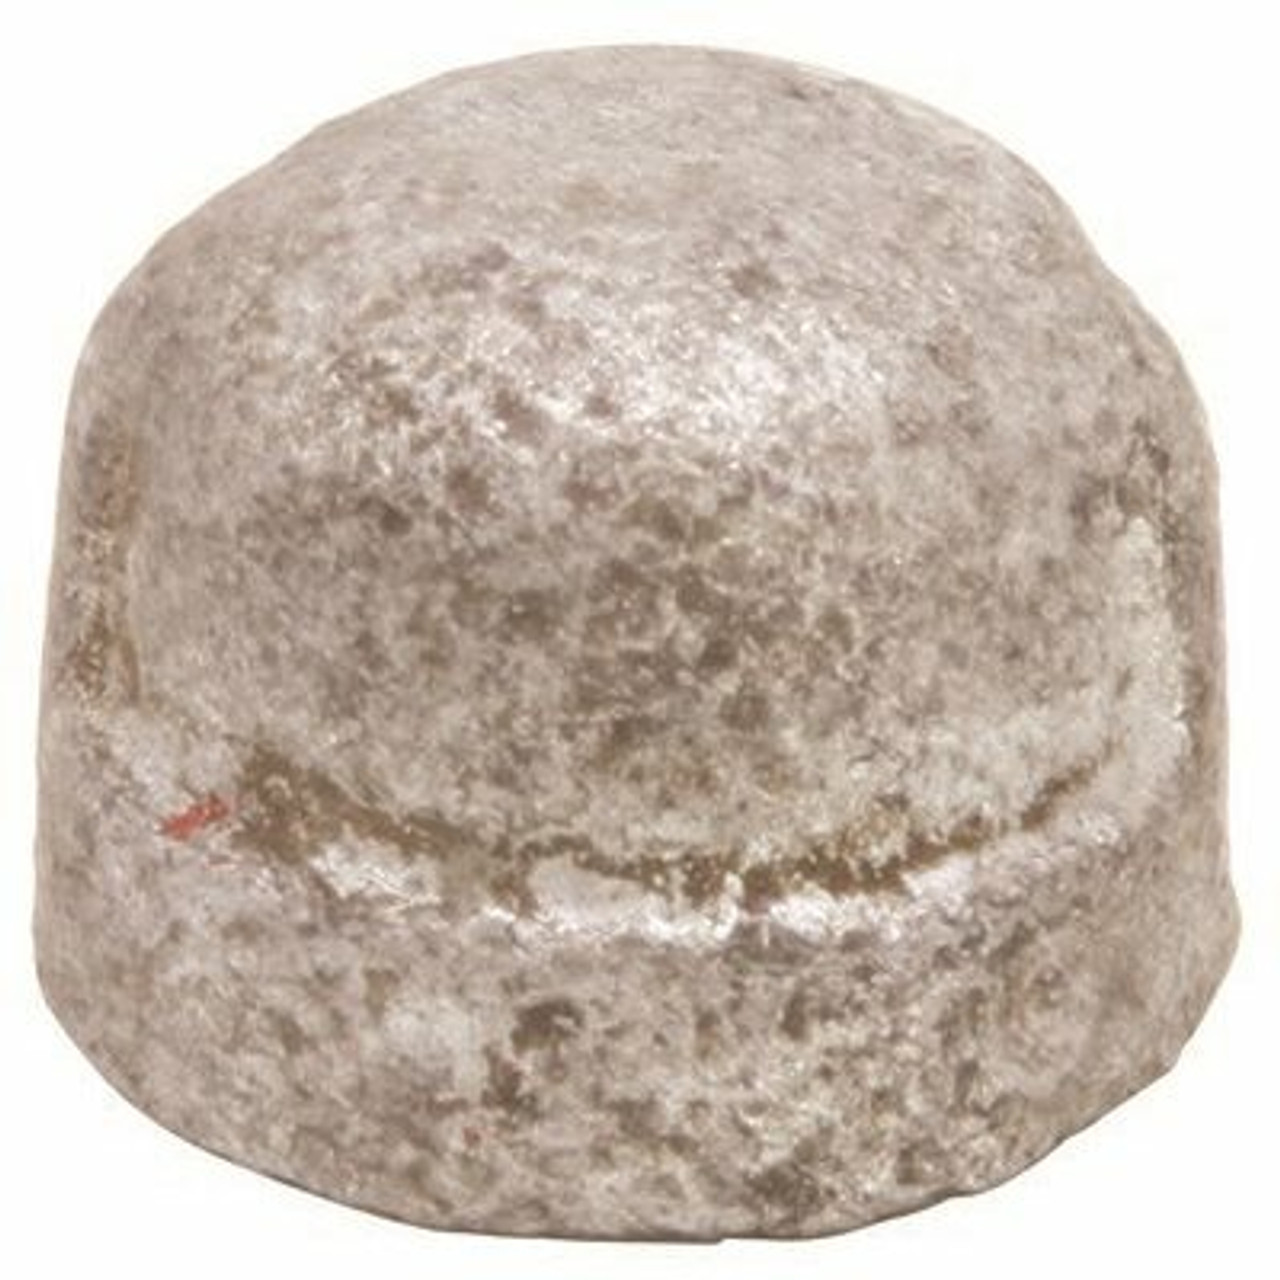 Proplus 1/2 In. Lead Free Galvanized Malleable Fitting Cap